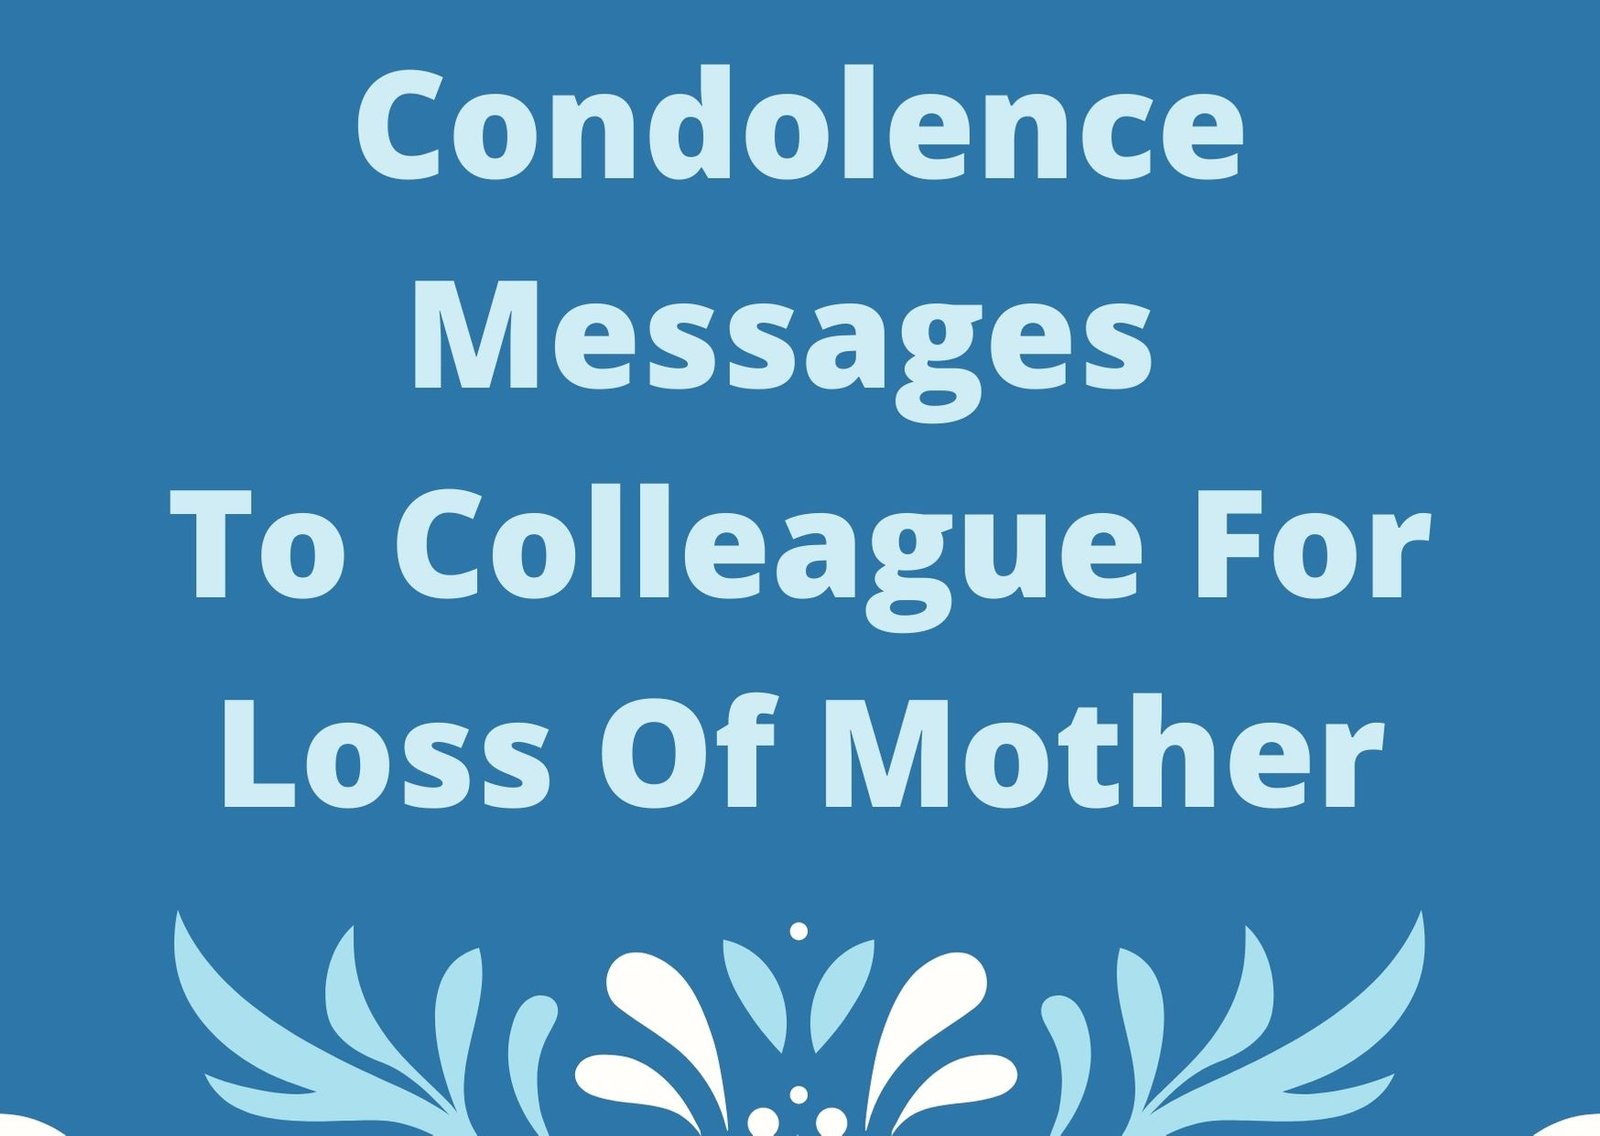 Condolence Messages To Colleague For Loss Of Mother